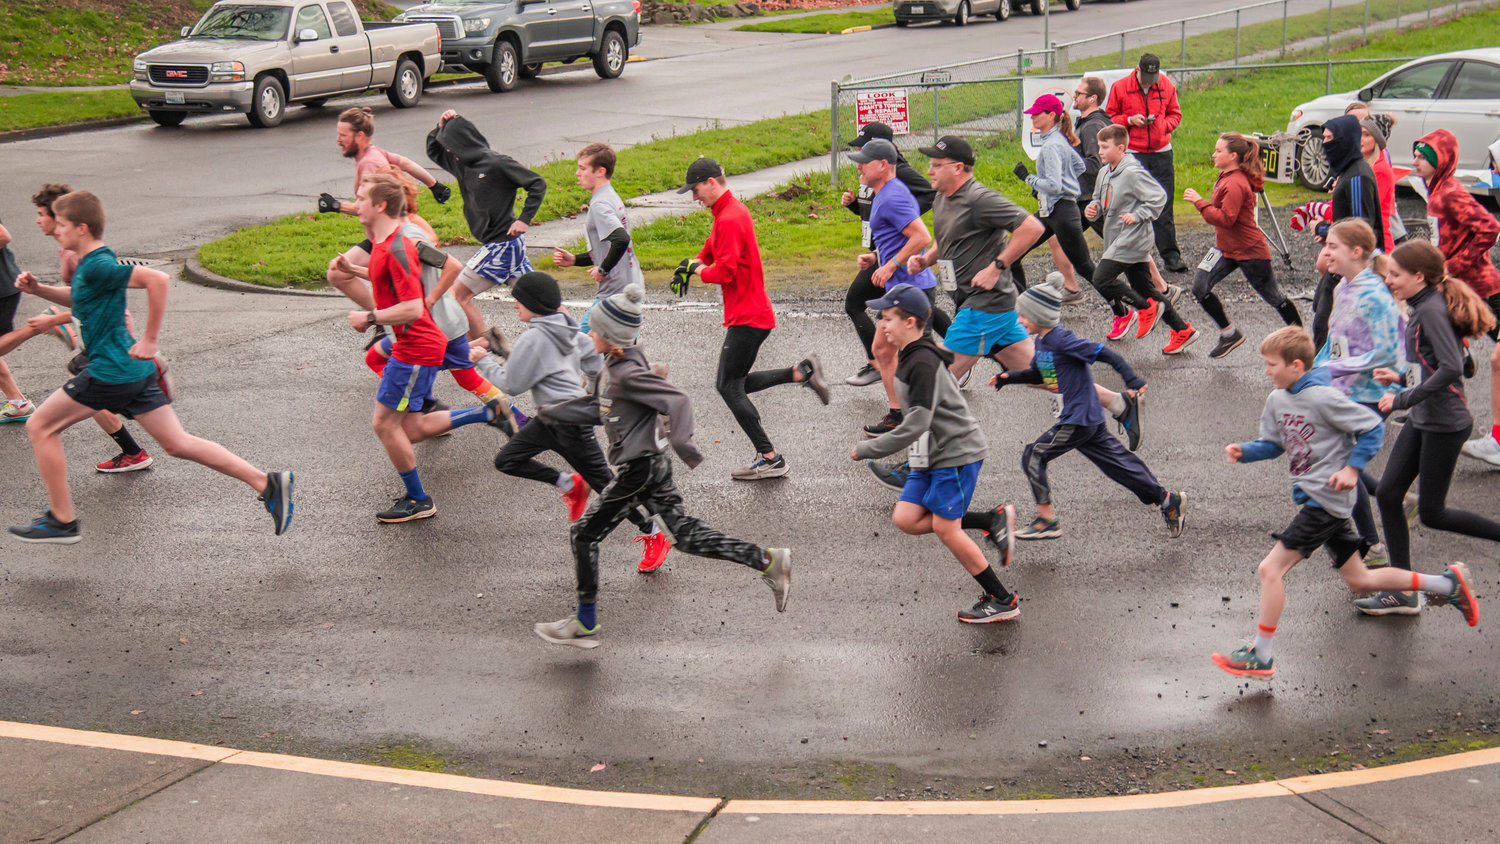 The Thorbeckes Athletic Performance Turkey Trot, presented by Althauser Rayan Abbarno, LLP takes place every Thanksgiving morning and benefits the Boys and Girls Club of Lewis County and the Chehalis Foundation. Stay tuned for more information.